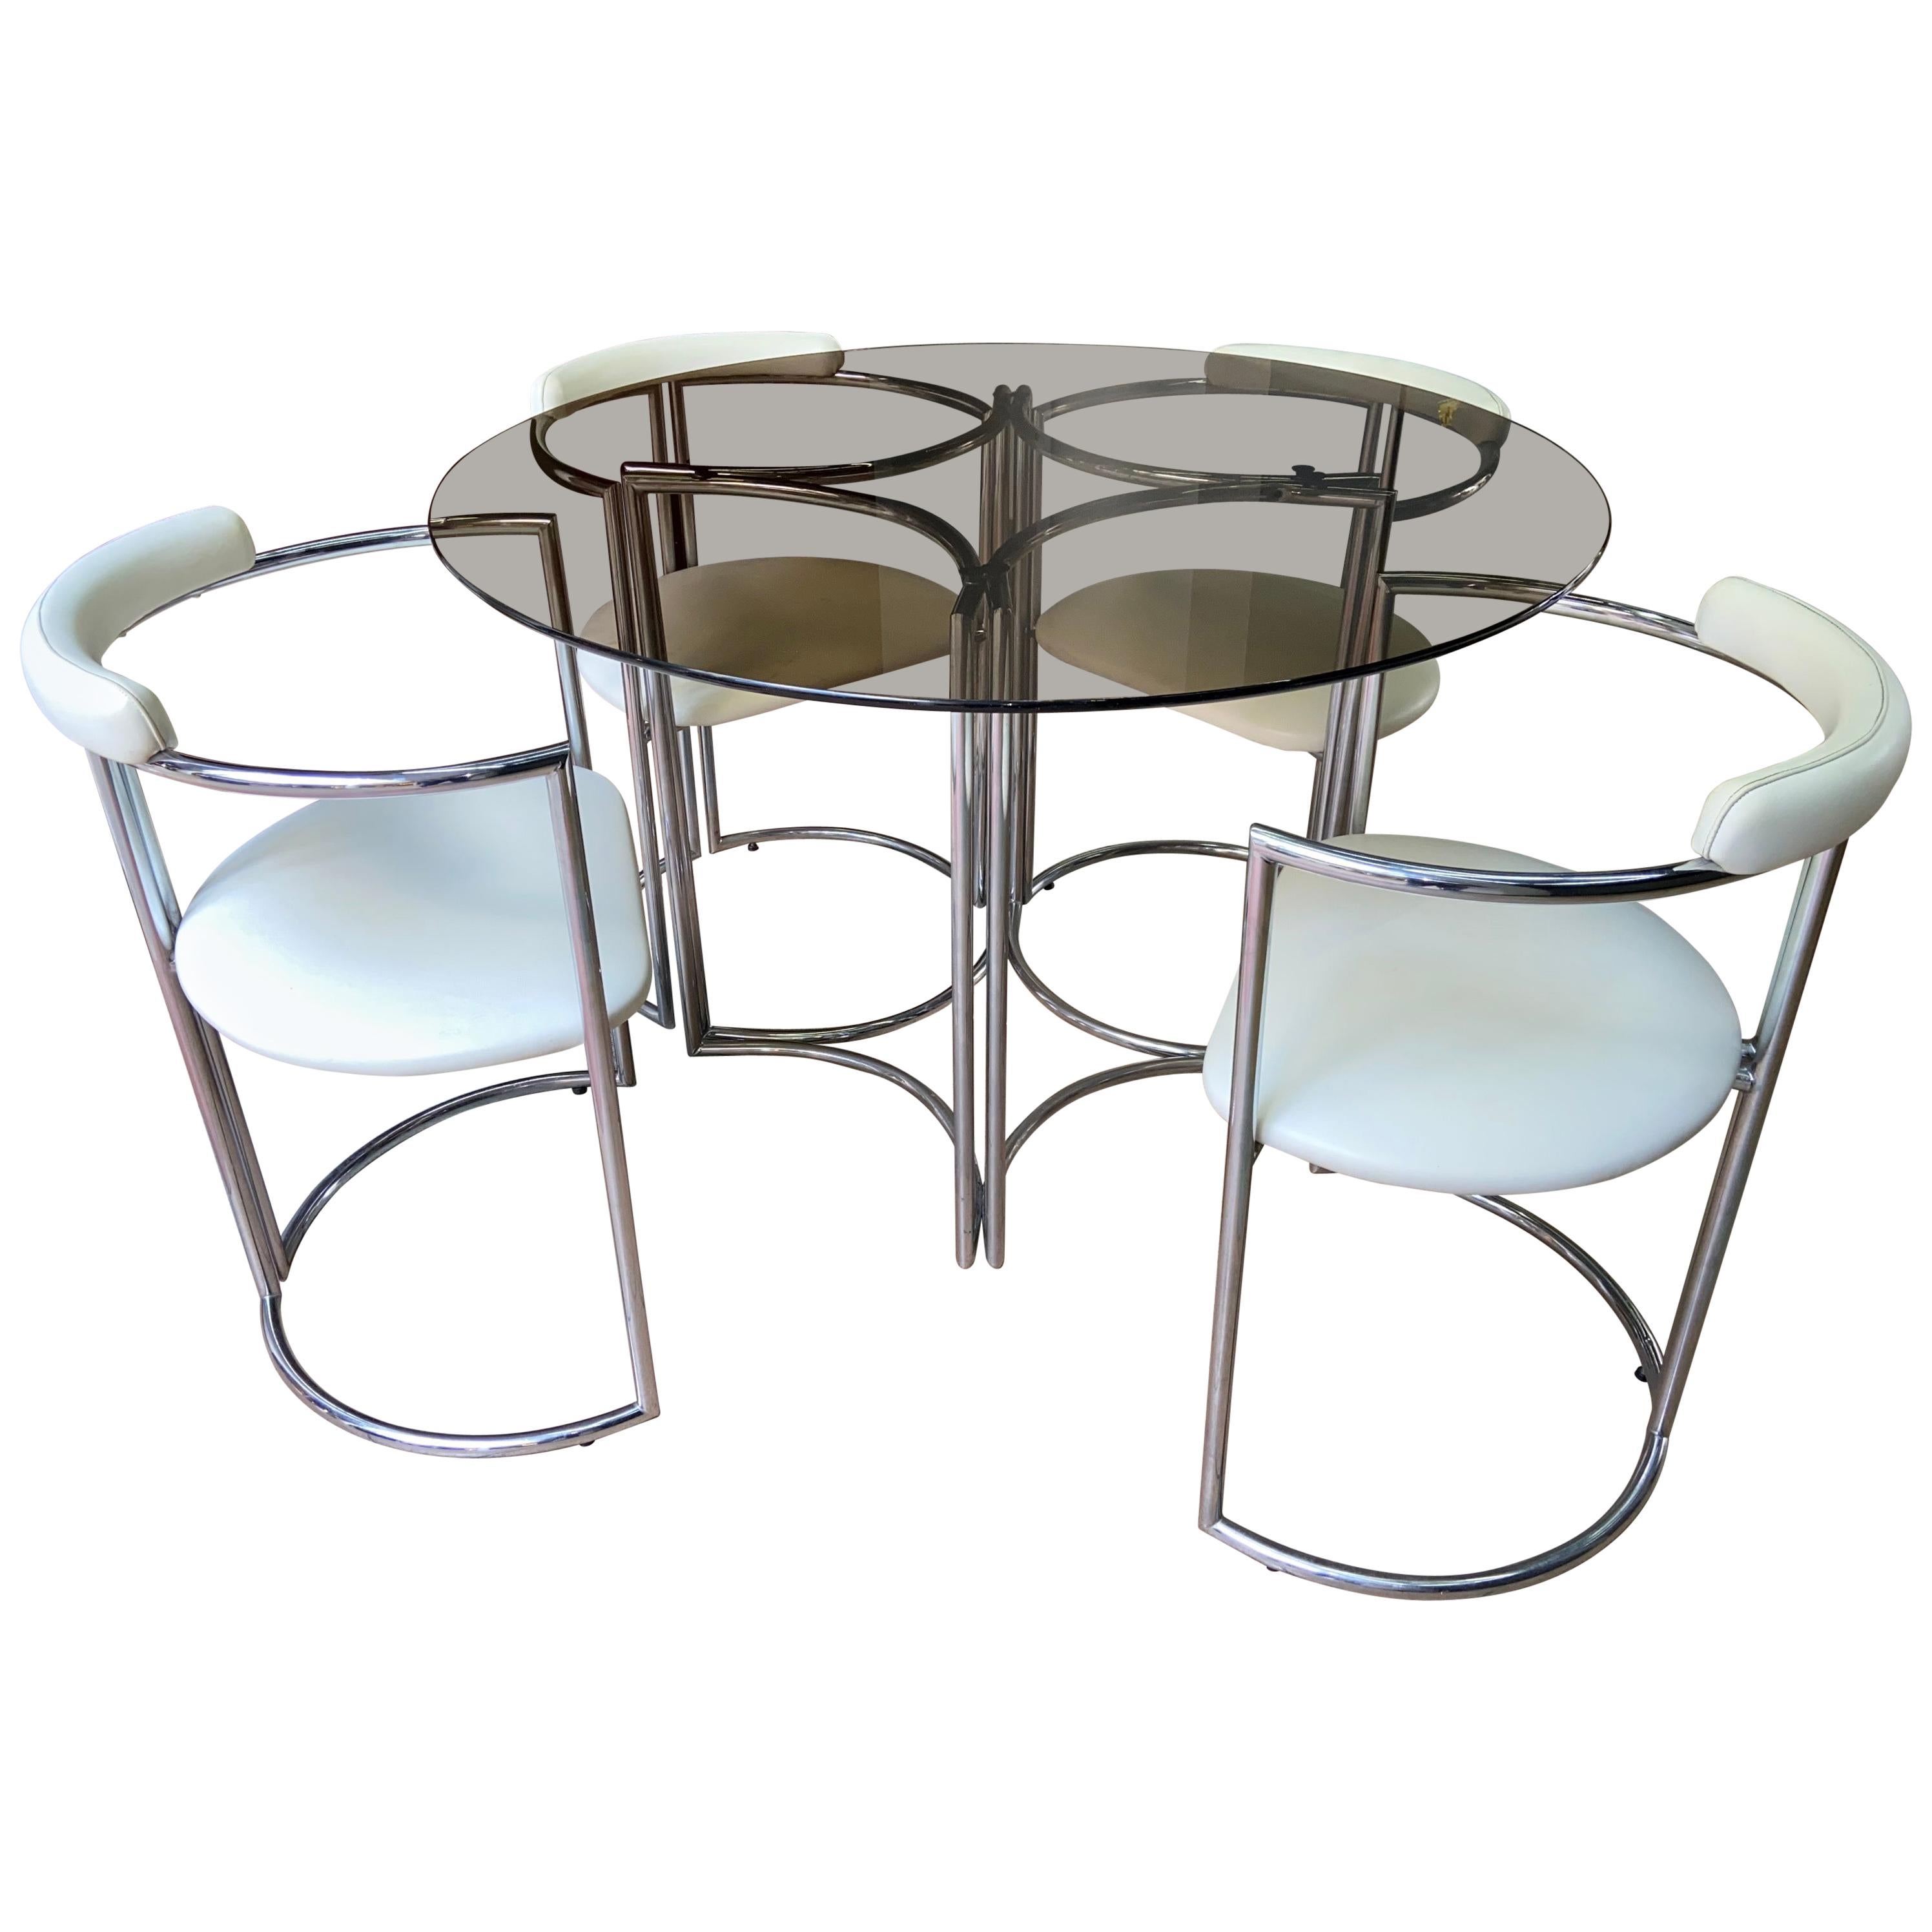 Arredo Paderno, Set of Table and 4 Chairs Set, Italy, 1972